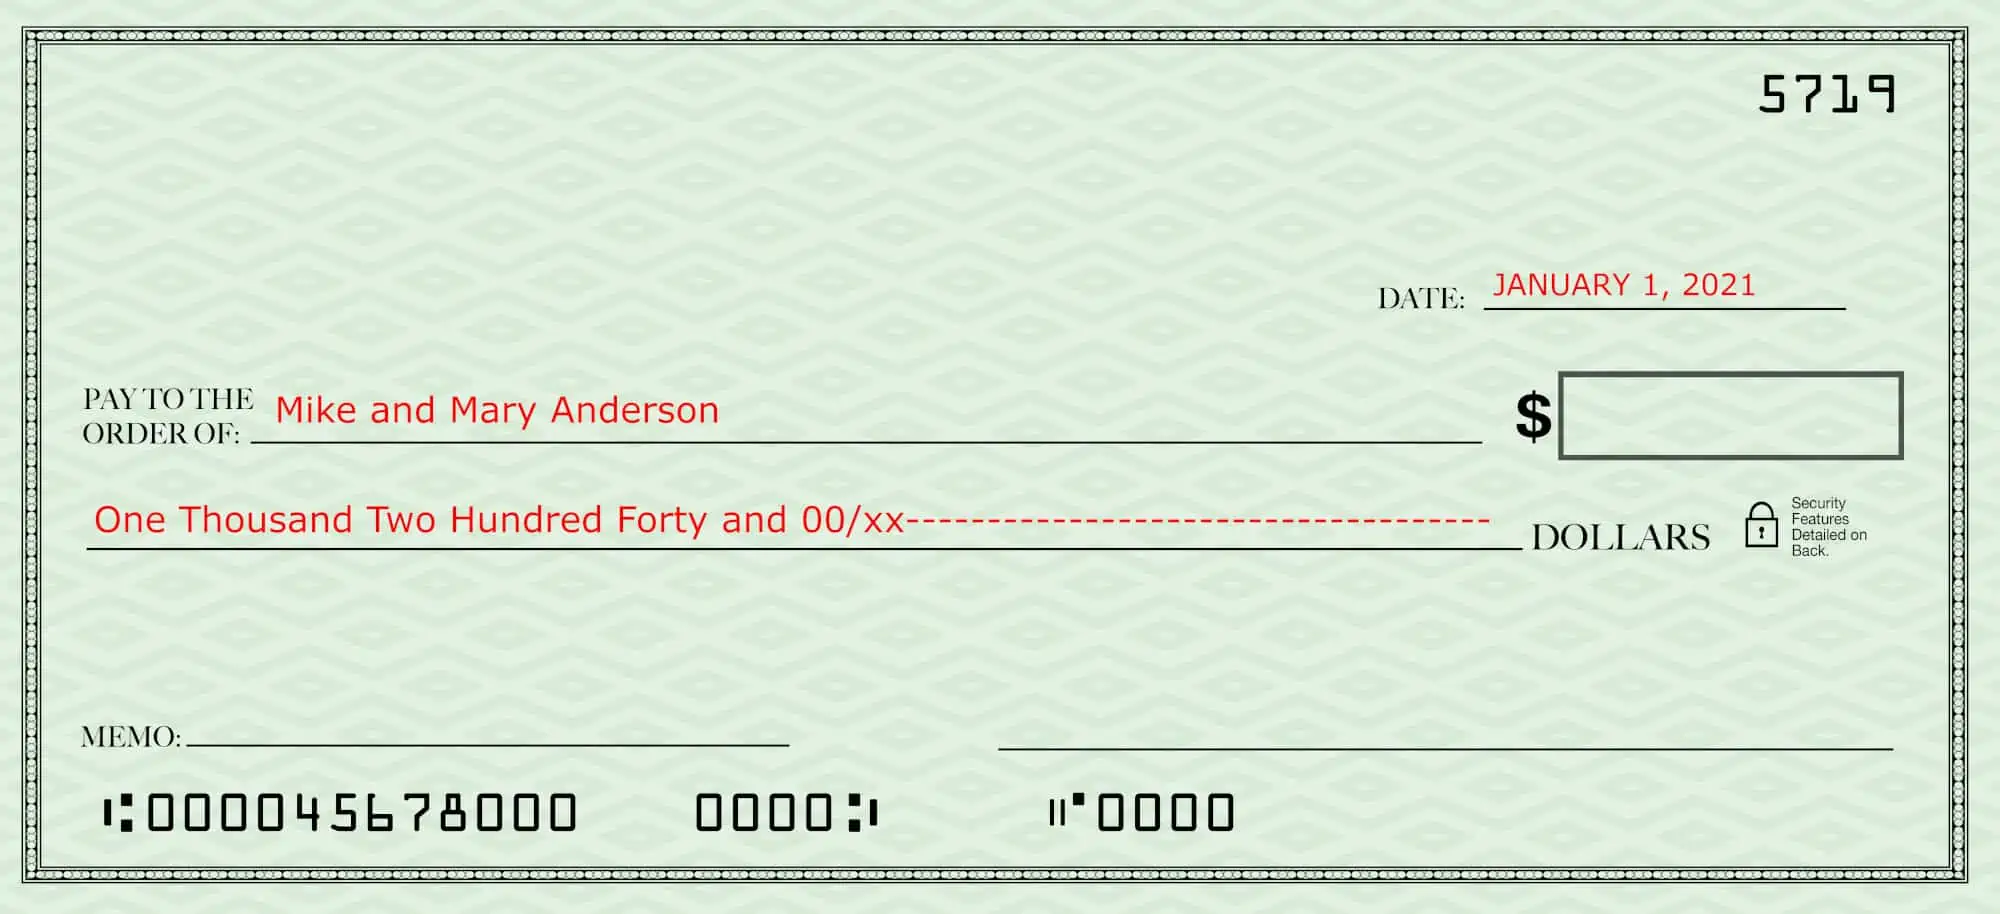 Filling out a check--blank check with the date, payee and amount in words filled in